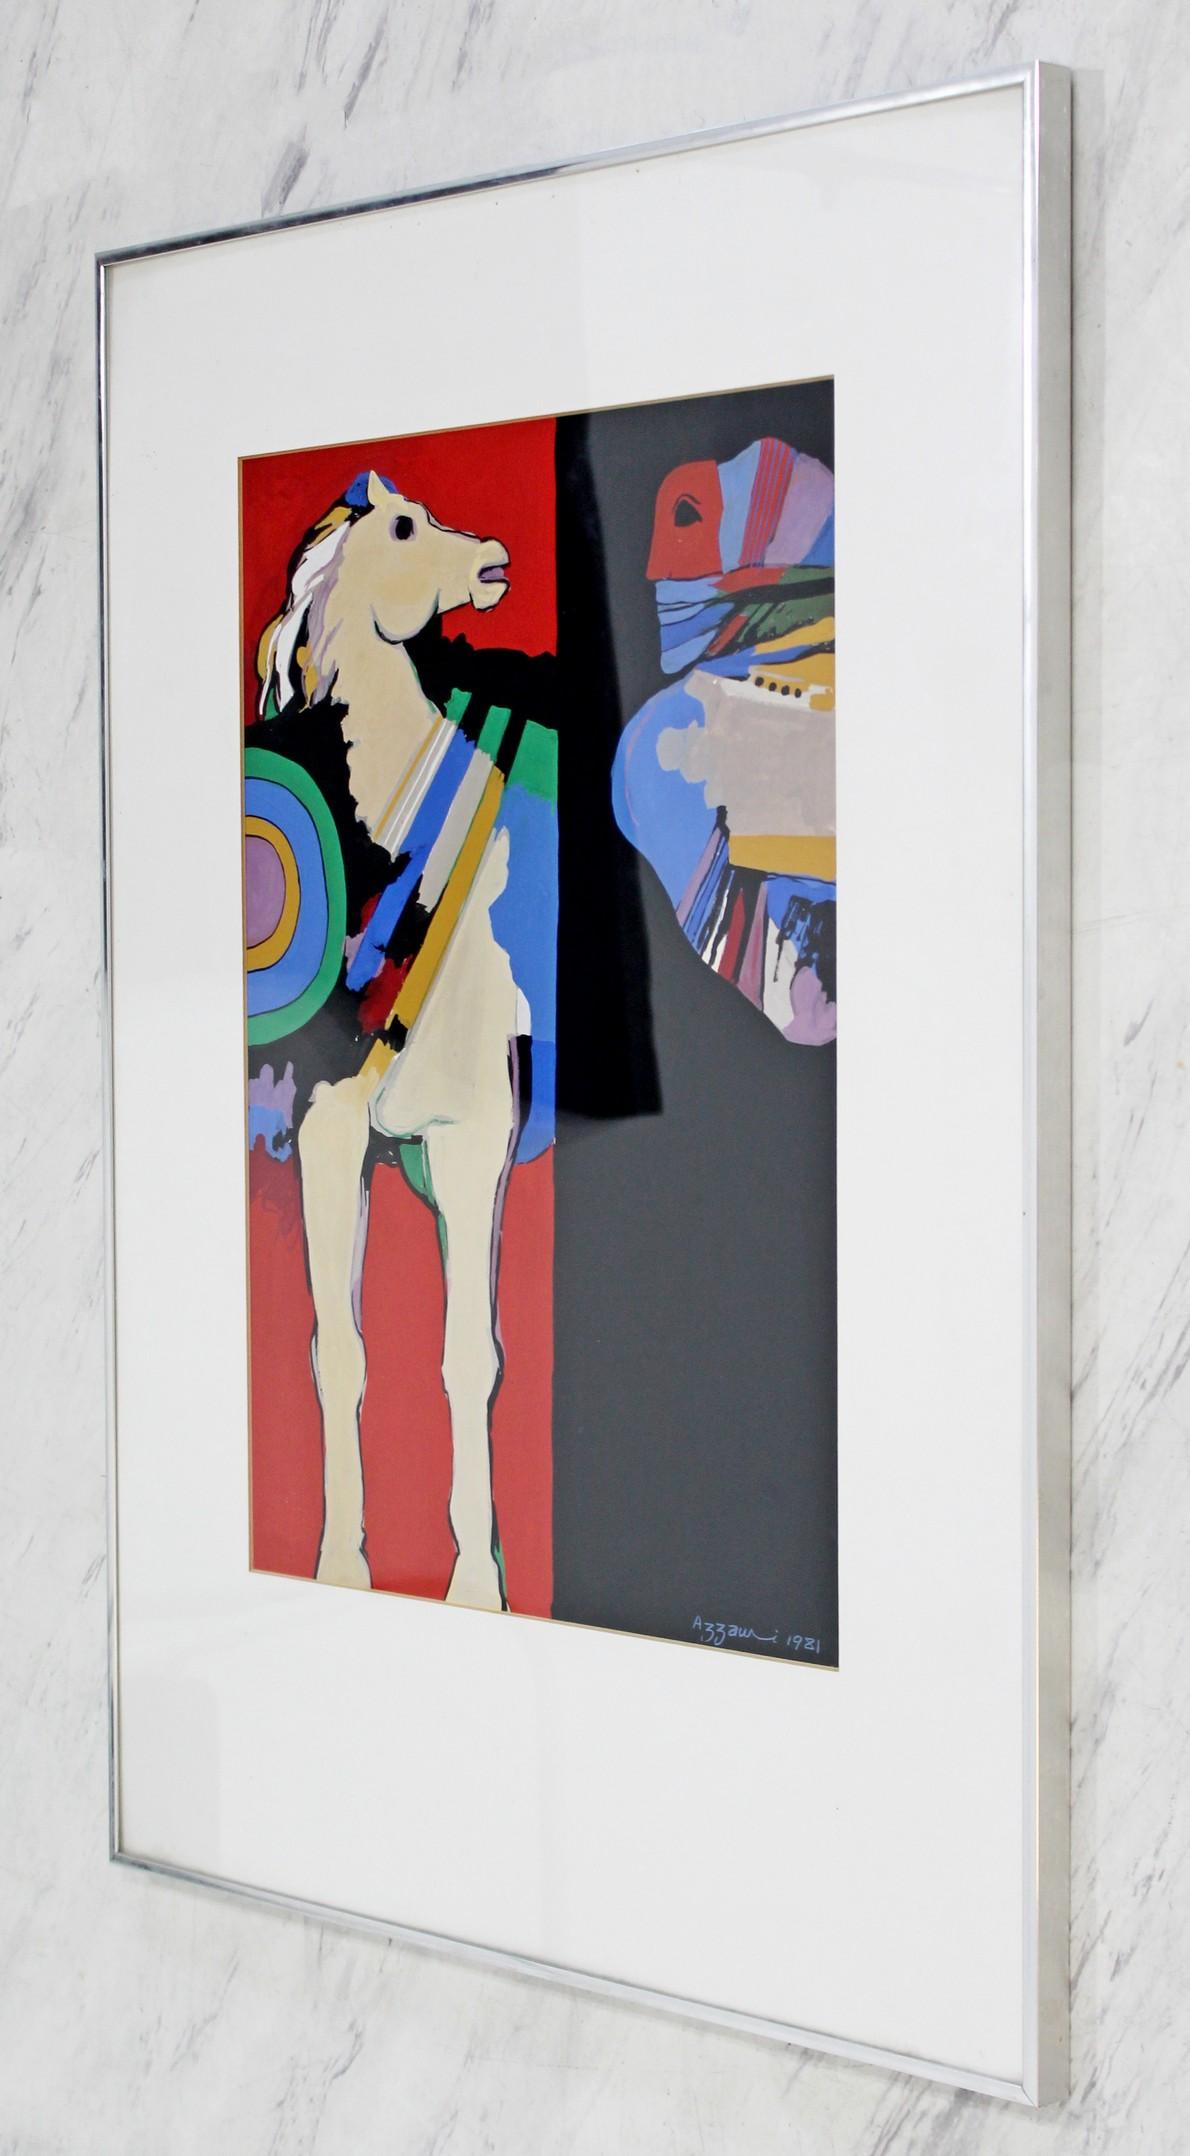 For your consideration is a stunning, original framed abstract study, signed and dated by Dia Azzawi, 1981.The piece is gouache on paper. In excellent condition. The dimensions of the frame are 22.5